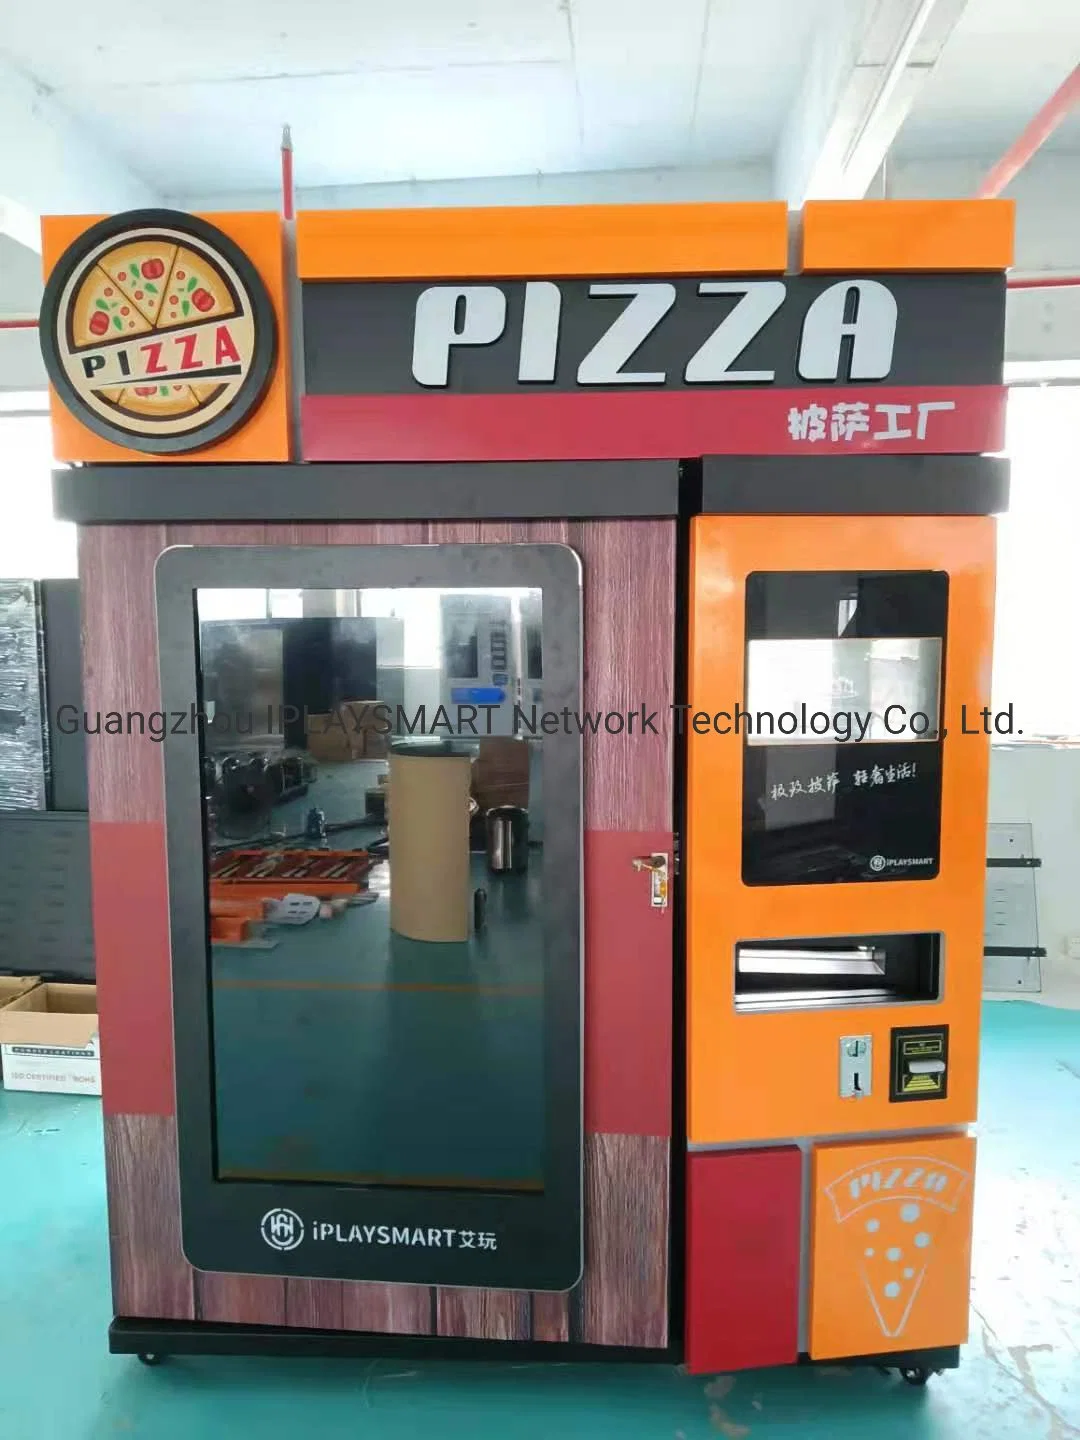 Pizza Vending Machine with Network